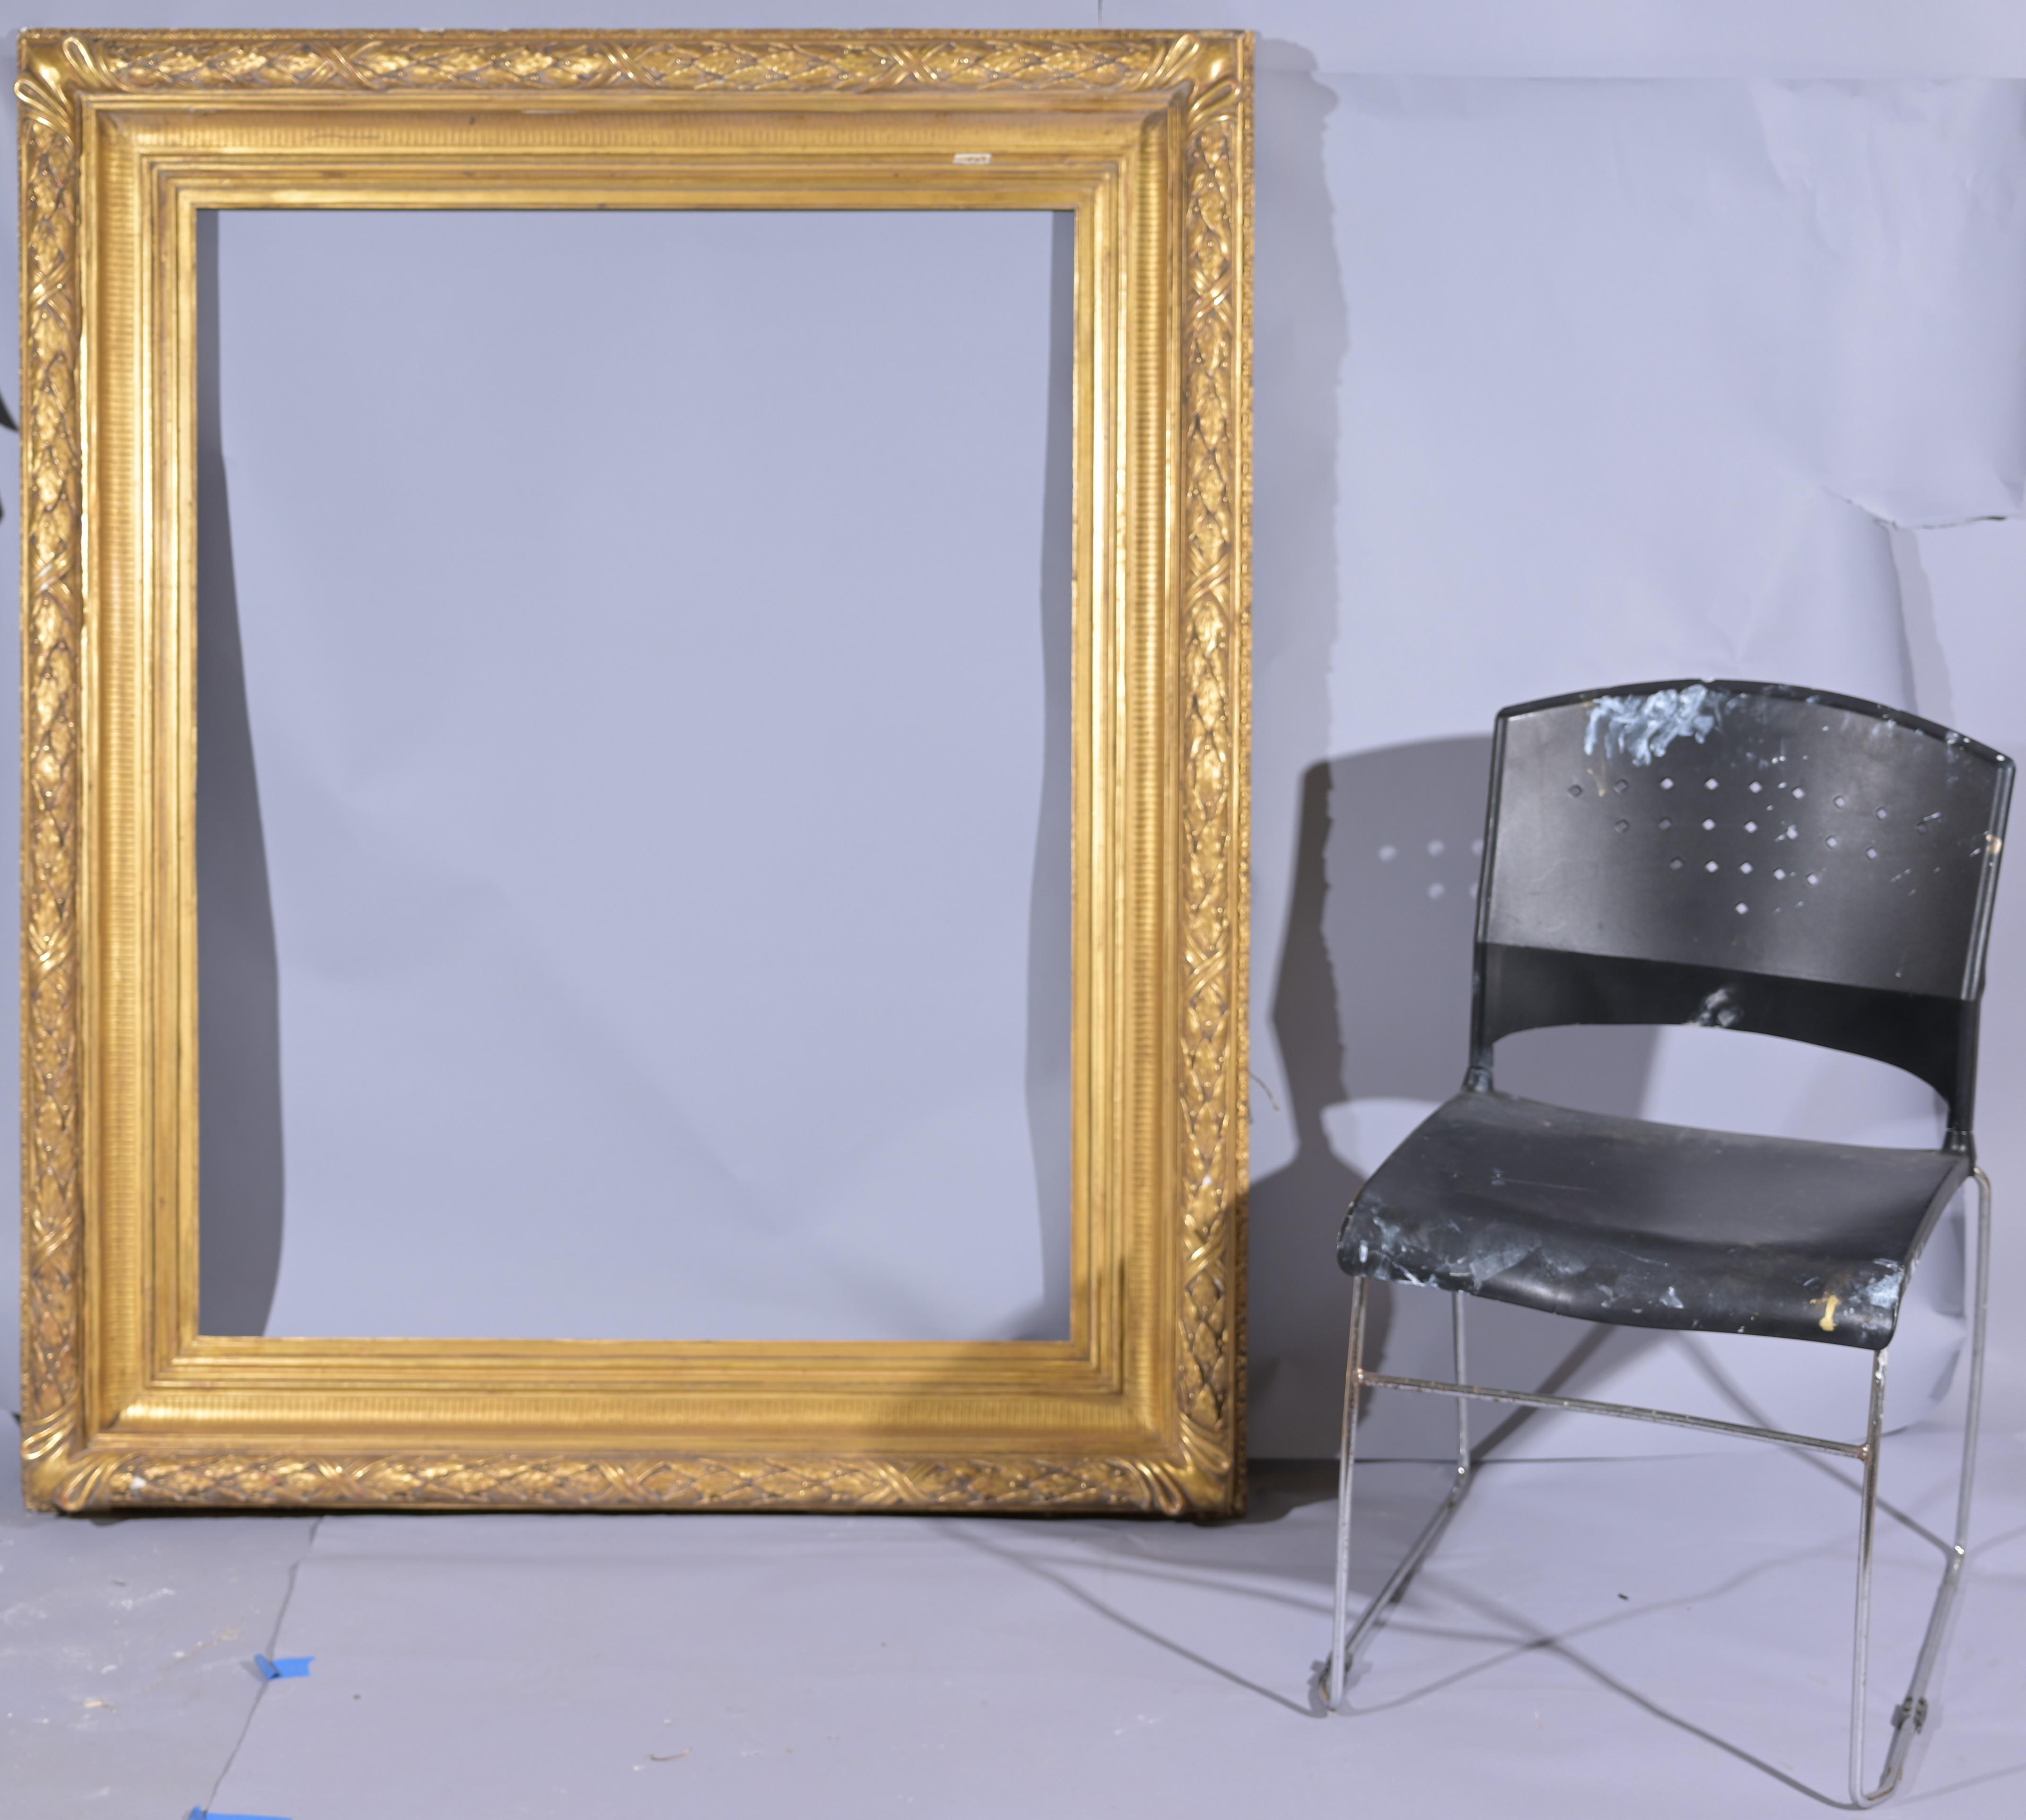 Large 19th C. Gilt/Fluted Cove Frame - 45.5 x 34.5 - Image 2 of 7